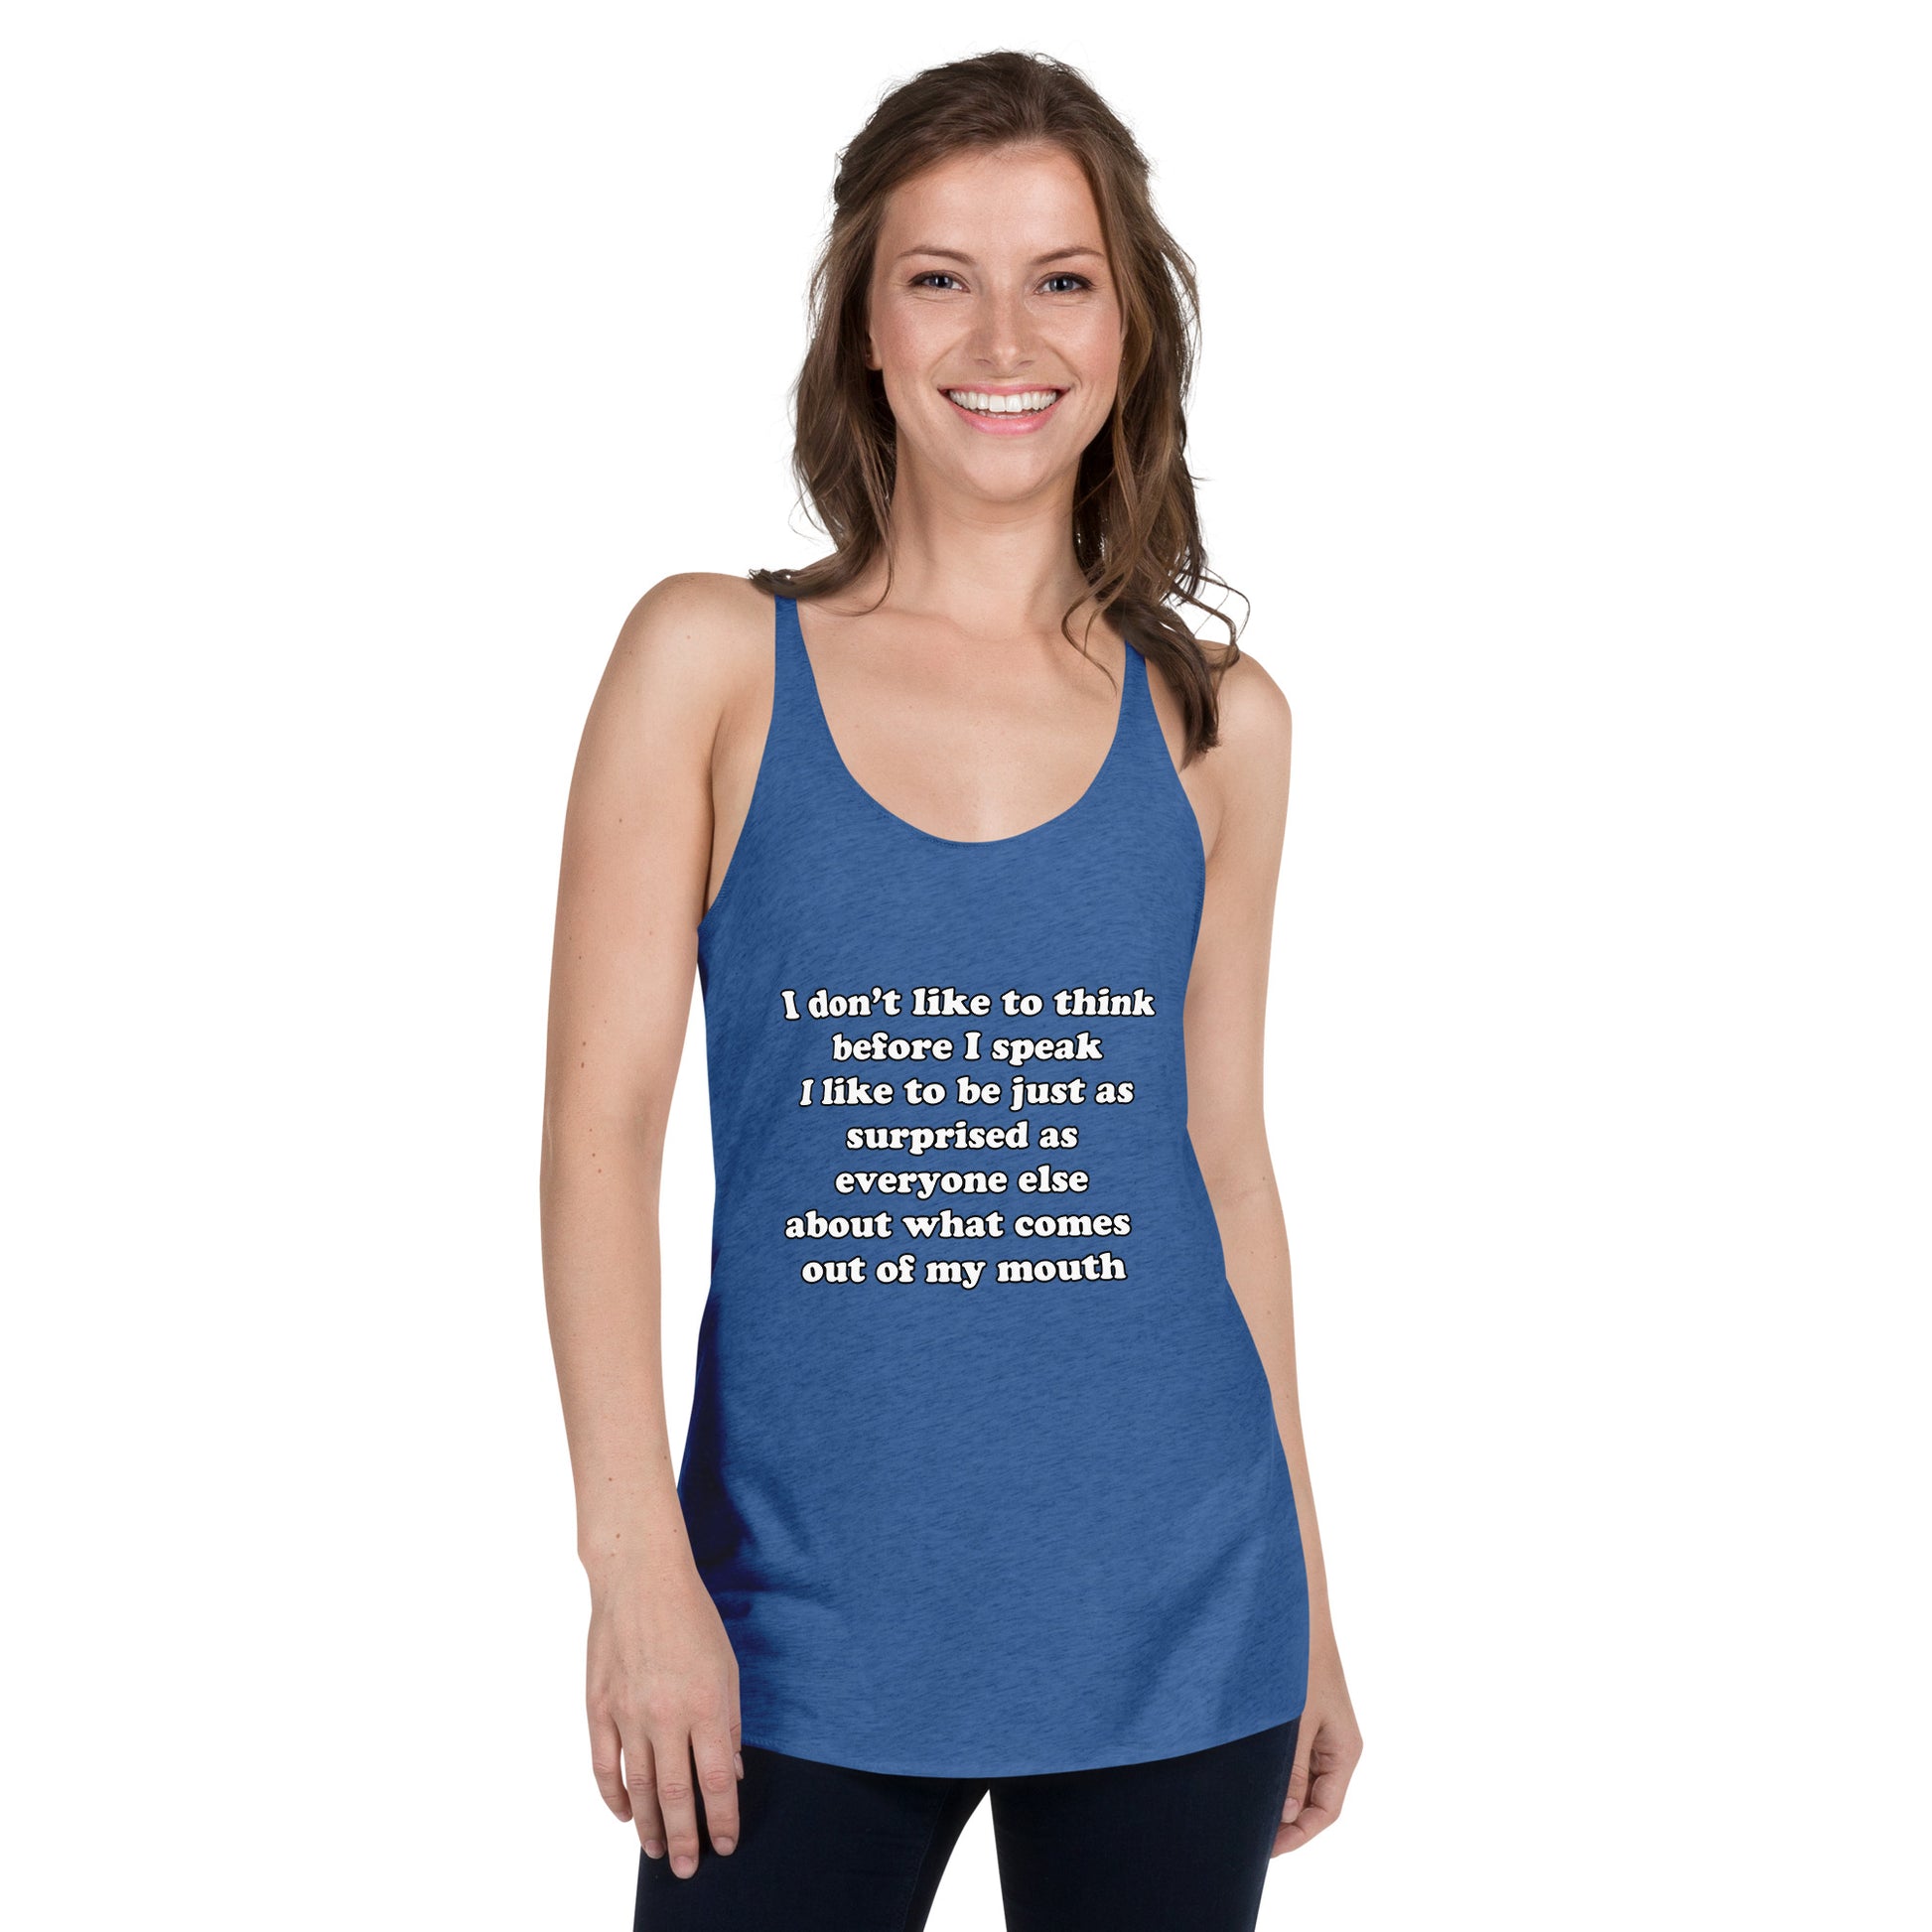 Woman with royal blue tank top with text “I don't think before I speak Just as serprised as everyone about what comes out of my mouth"